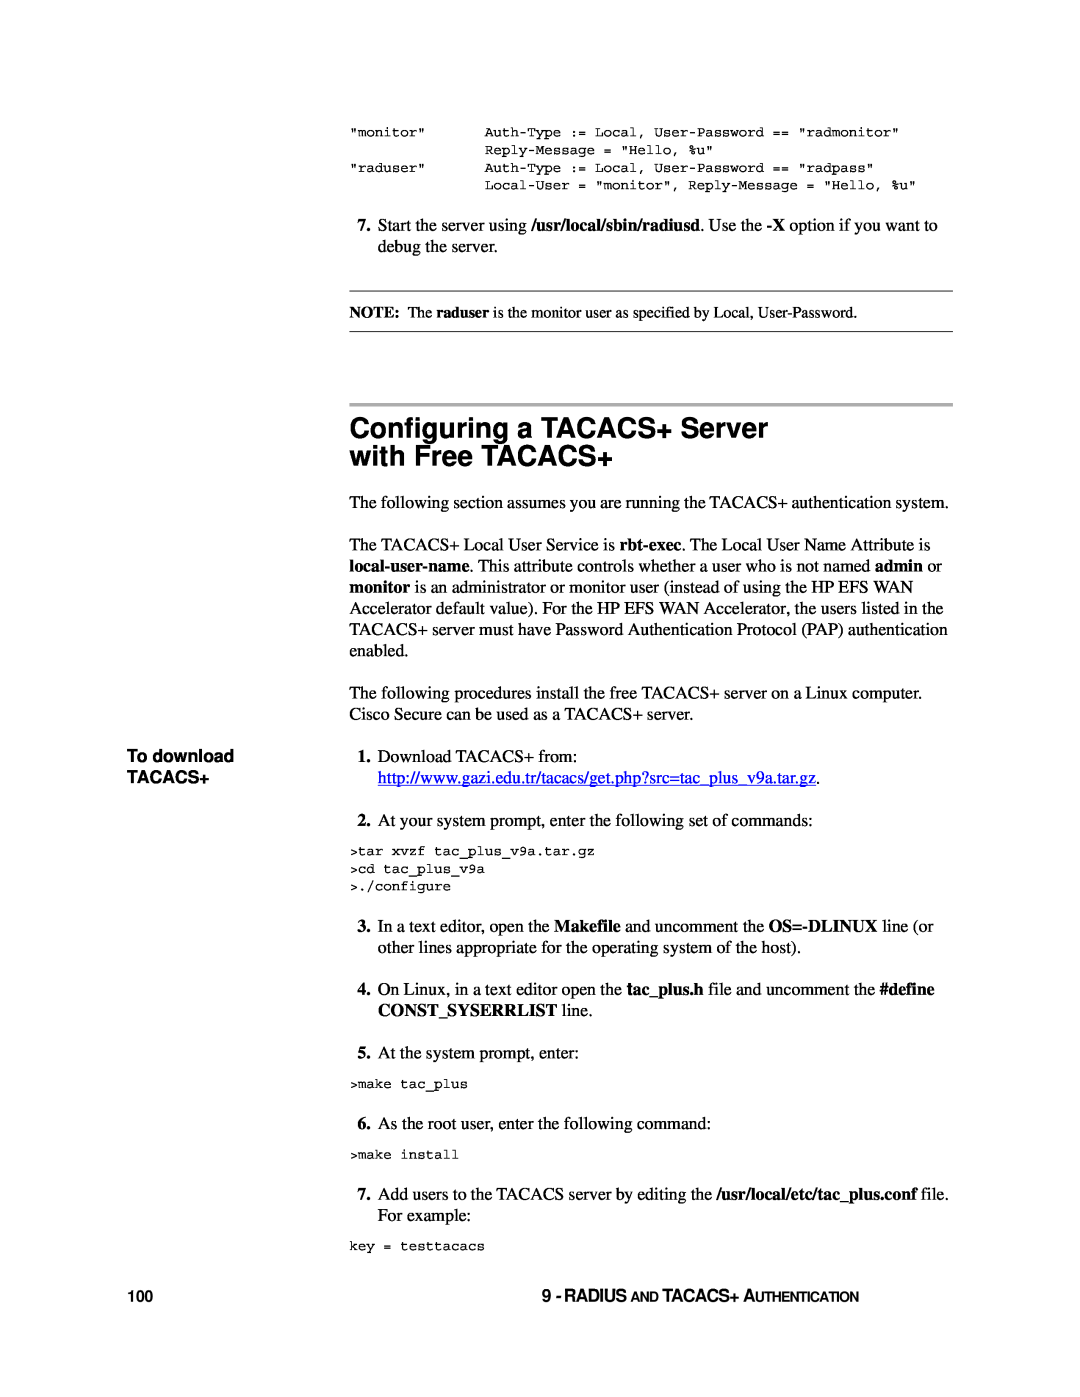 HP Enterprise File Services WAN Accelerator manual Configuring a TACACS+ Server with Free TACACS+, To download, Tacacs+ 